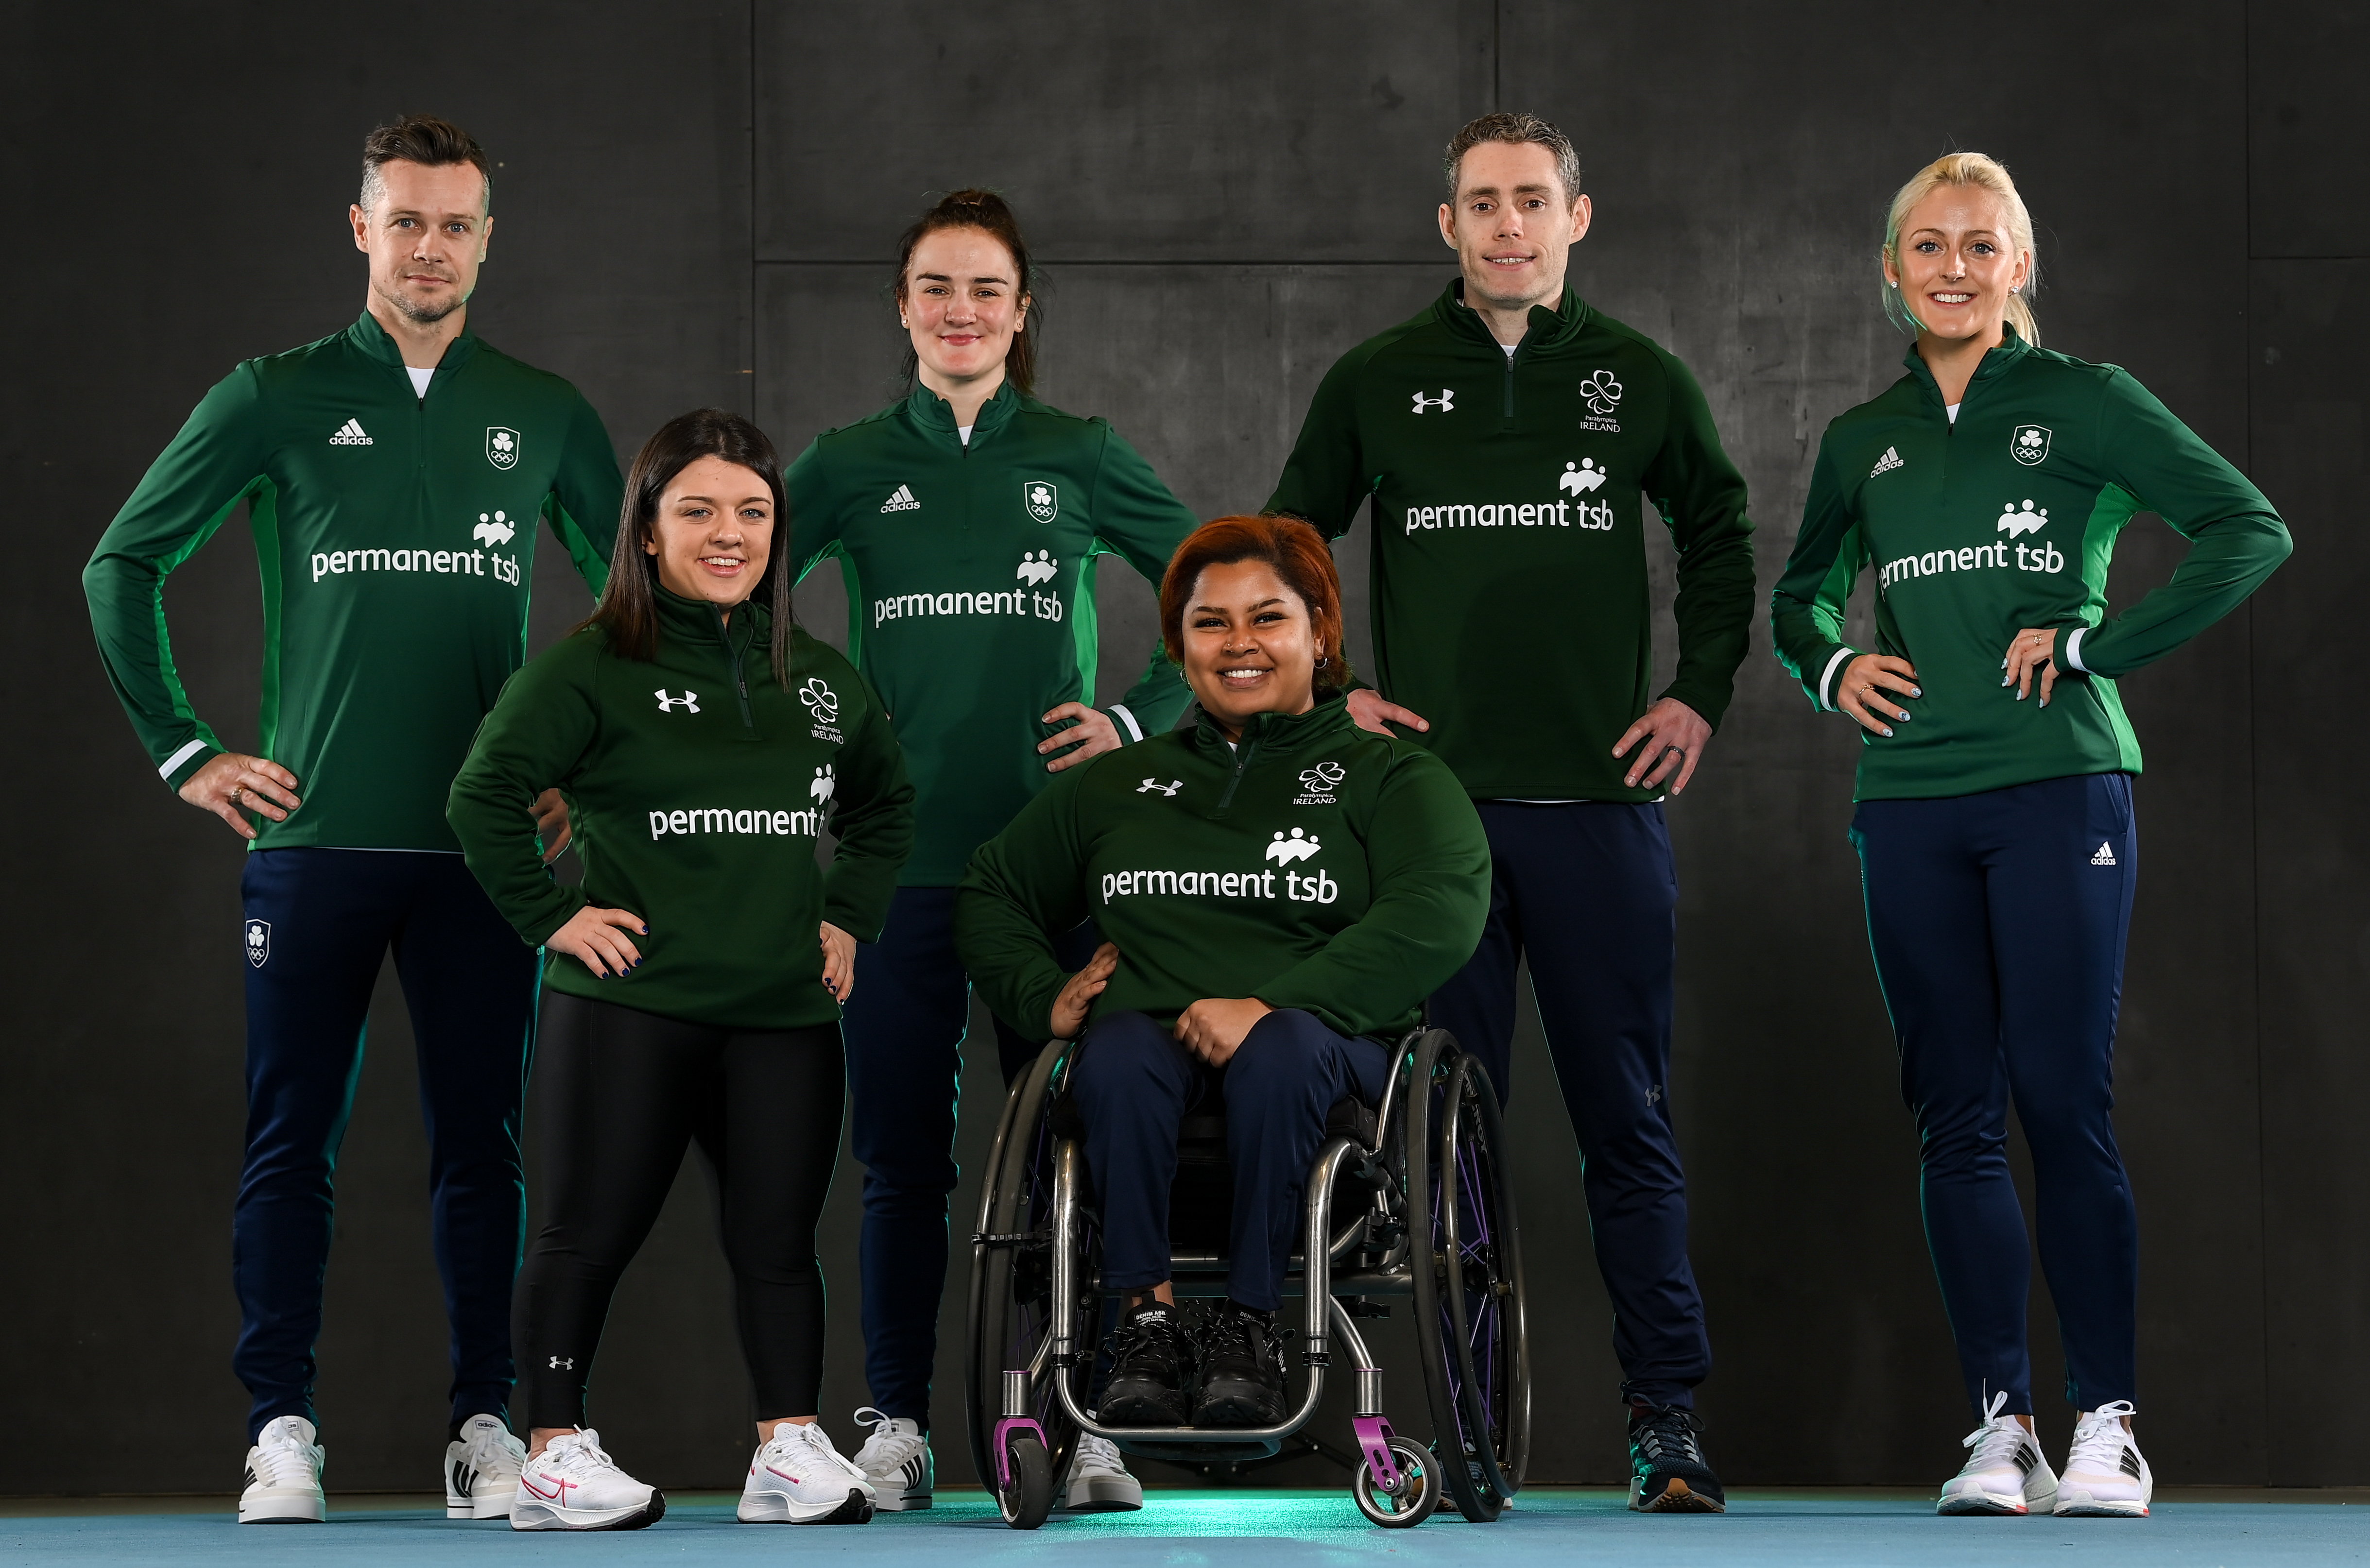 6 members from the Paralympics and Olympics teams in uniform 